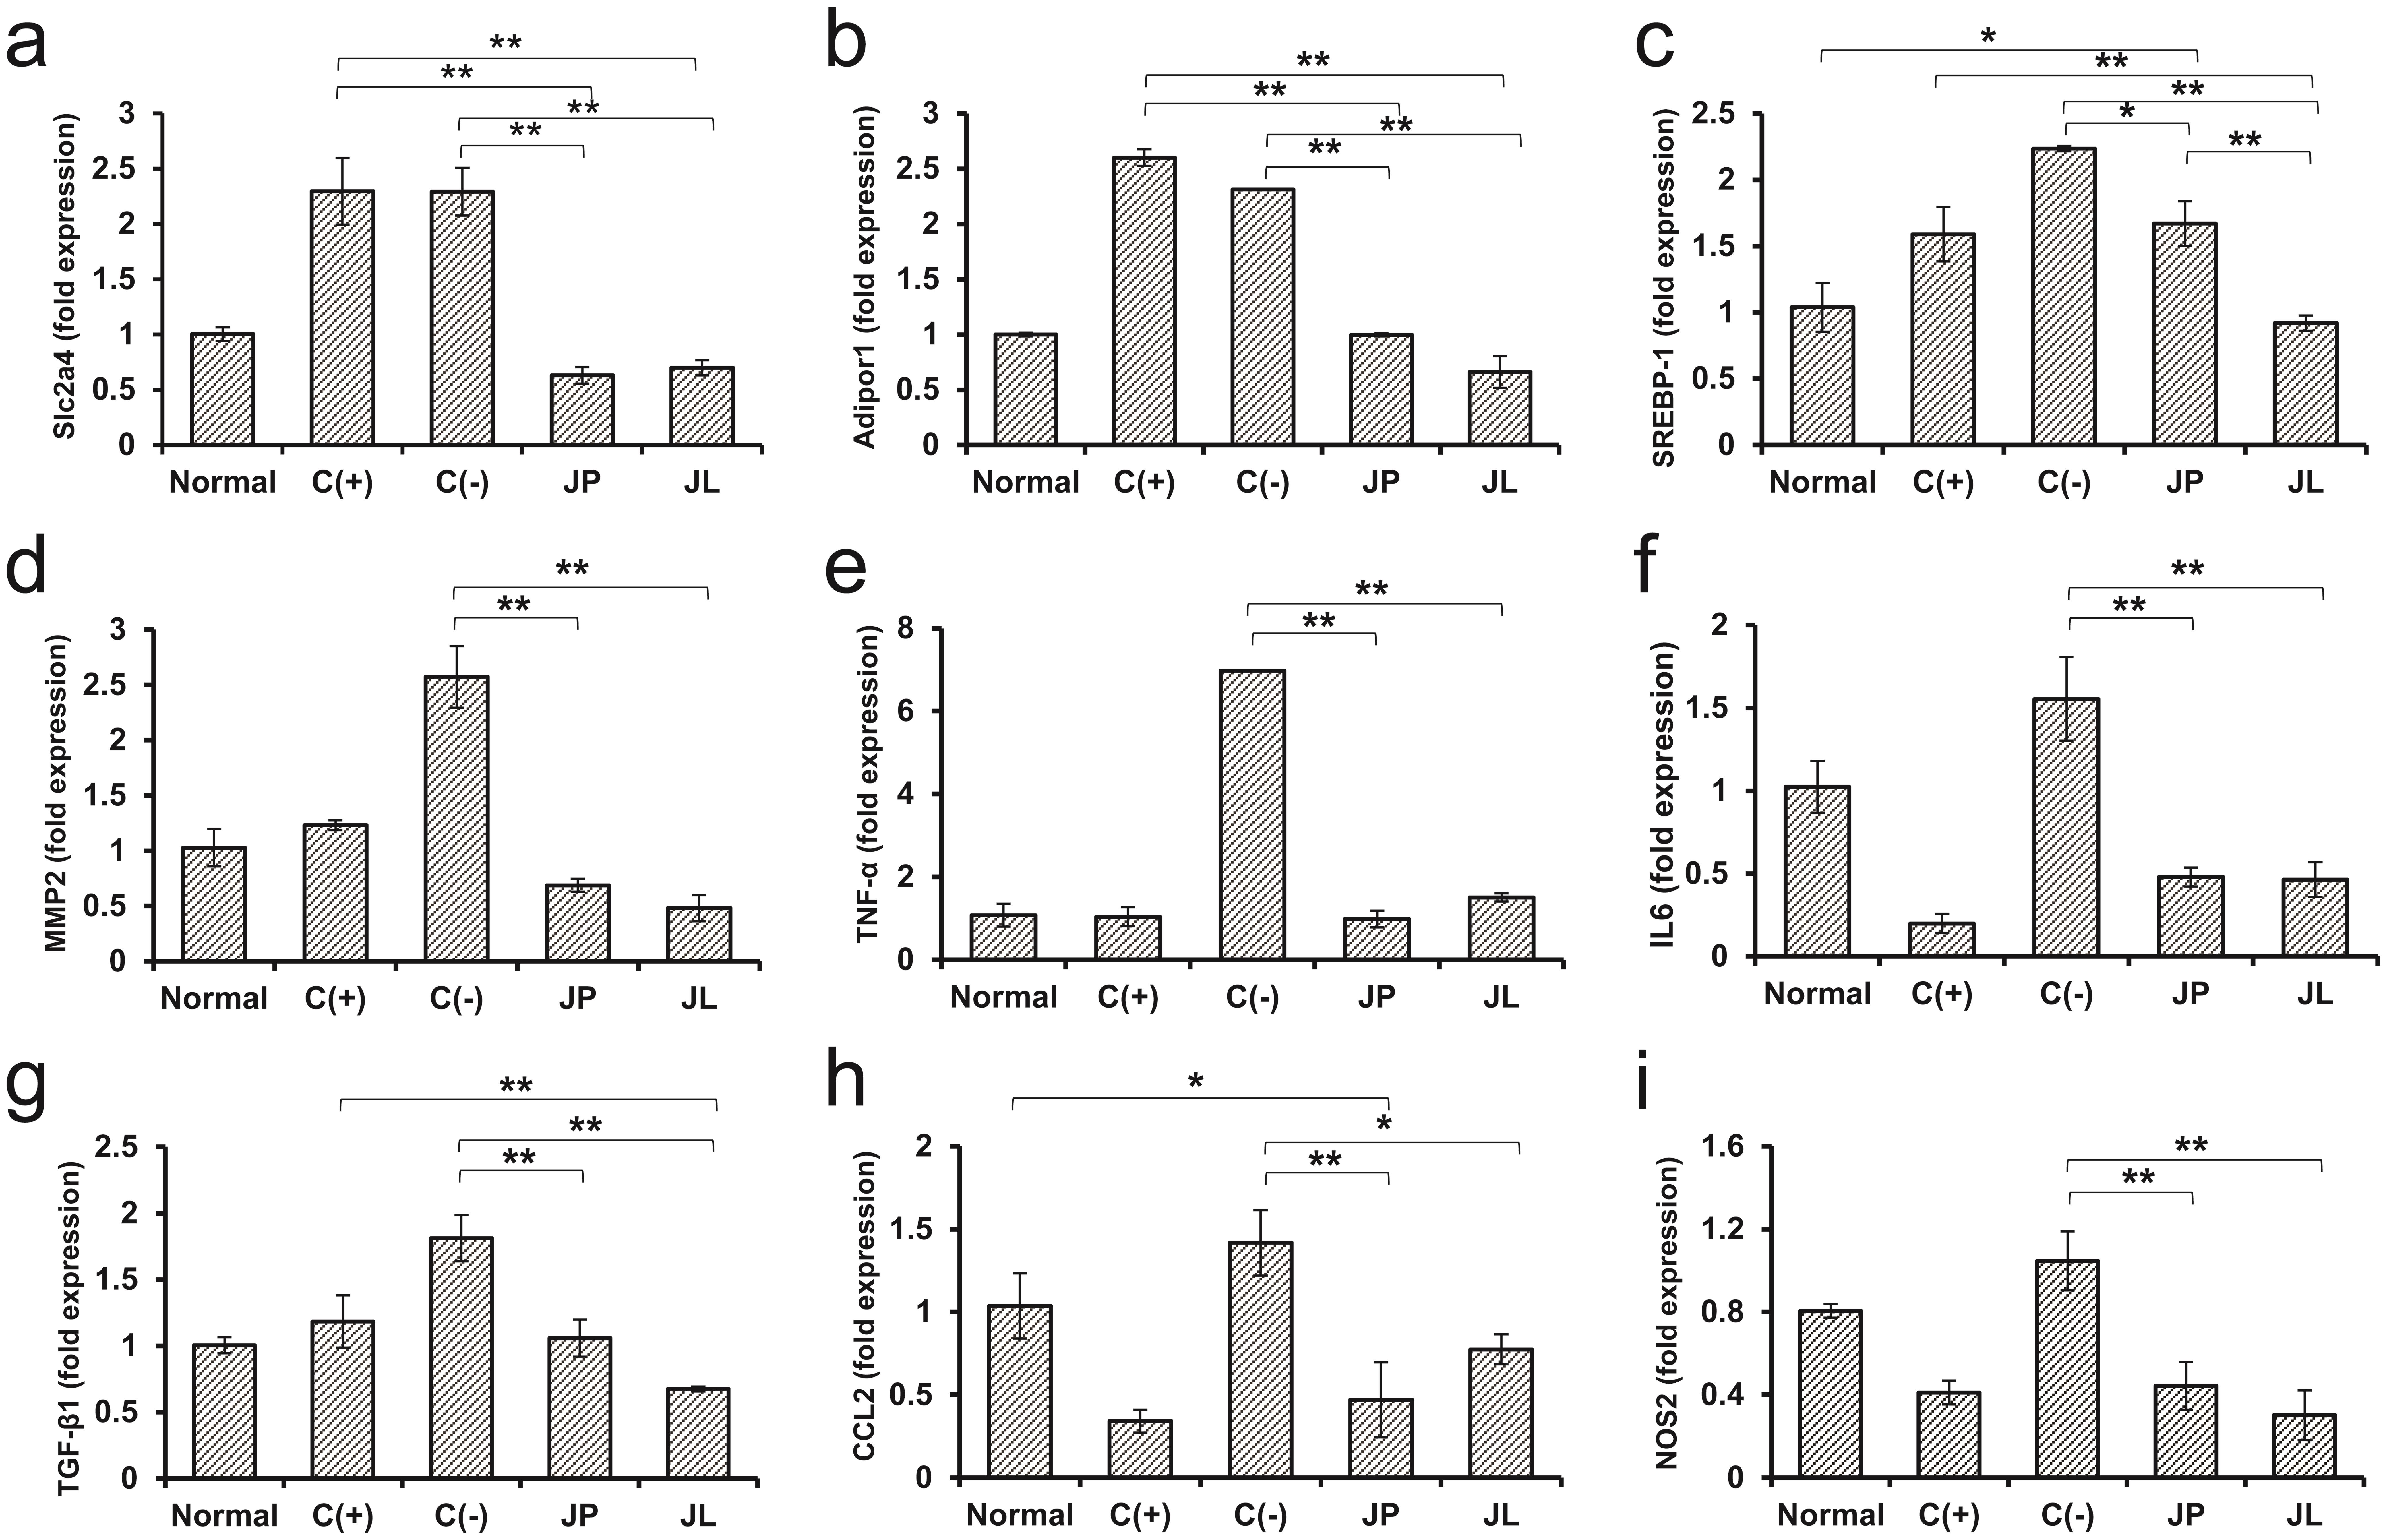 Gene expression of Slc2a4 (a), Adipor1 (b), SREBP-1 (c), MMP2 (d), TNF-α (e), IL6 (f), TGF-β1 (g), CCL2 (h), and NOS2 (i) in the controls (positive and negative) and fermented diet treated groups (JP and JL) relative to Normal.